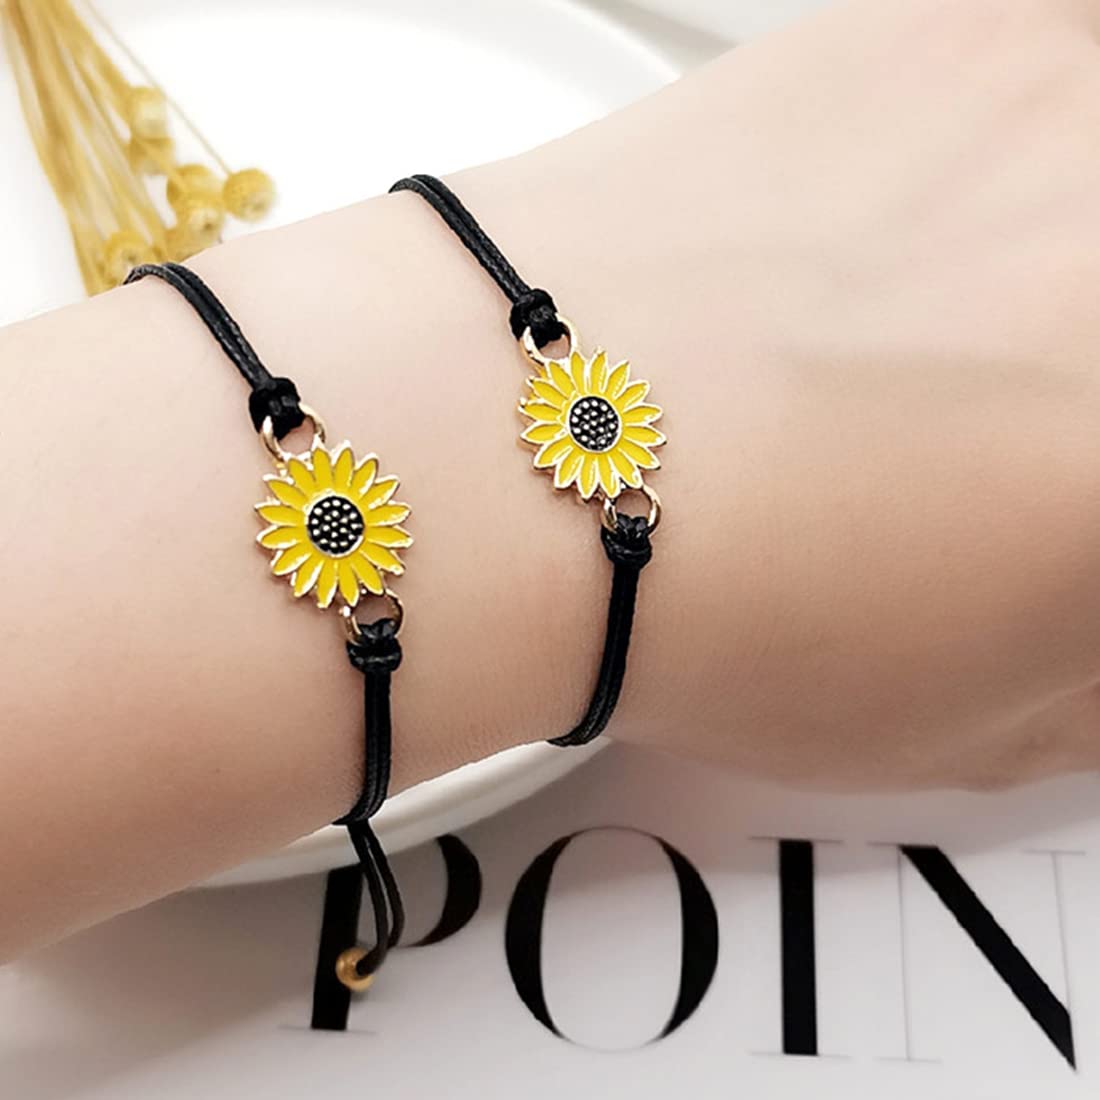 Yellow Chimes Bracelets for Women Set of 2 Pcs Floral Bracelet Yellow Charm Bracelet For Loved Once/Couples/Friends For Unisex Adults Boys And Girls